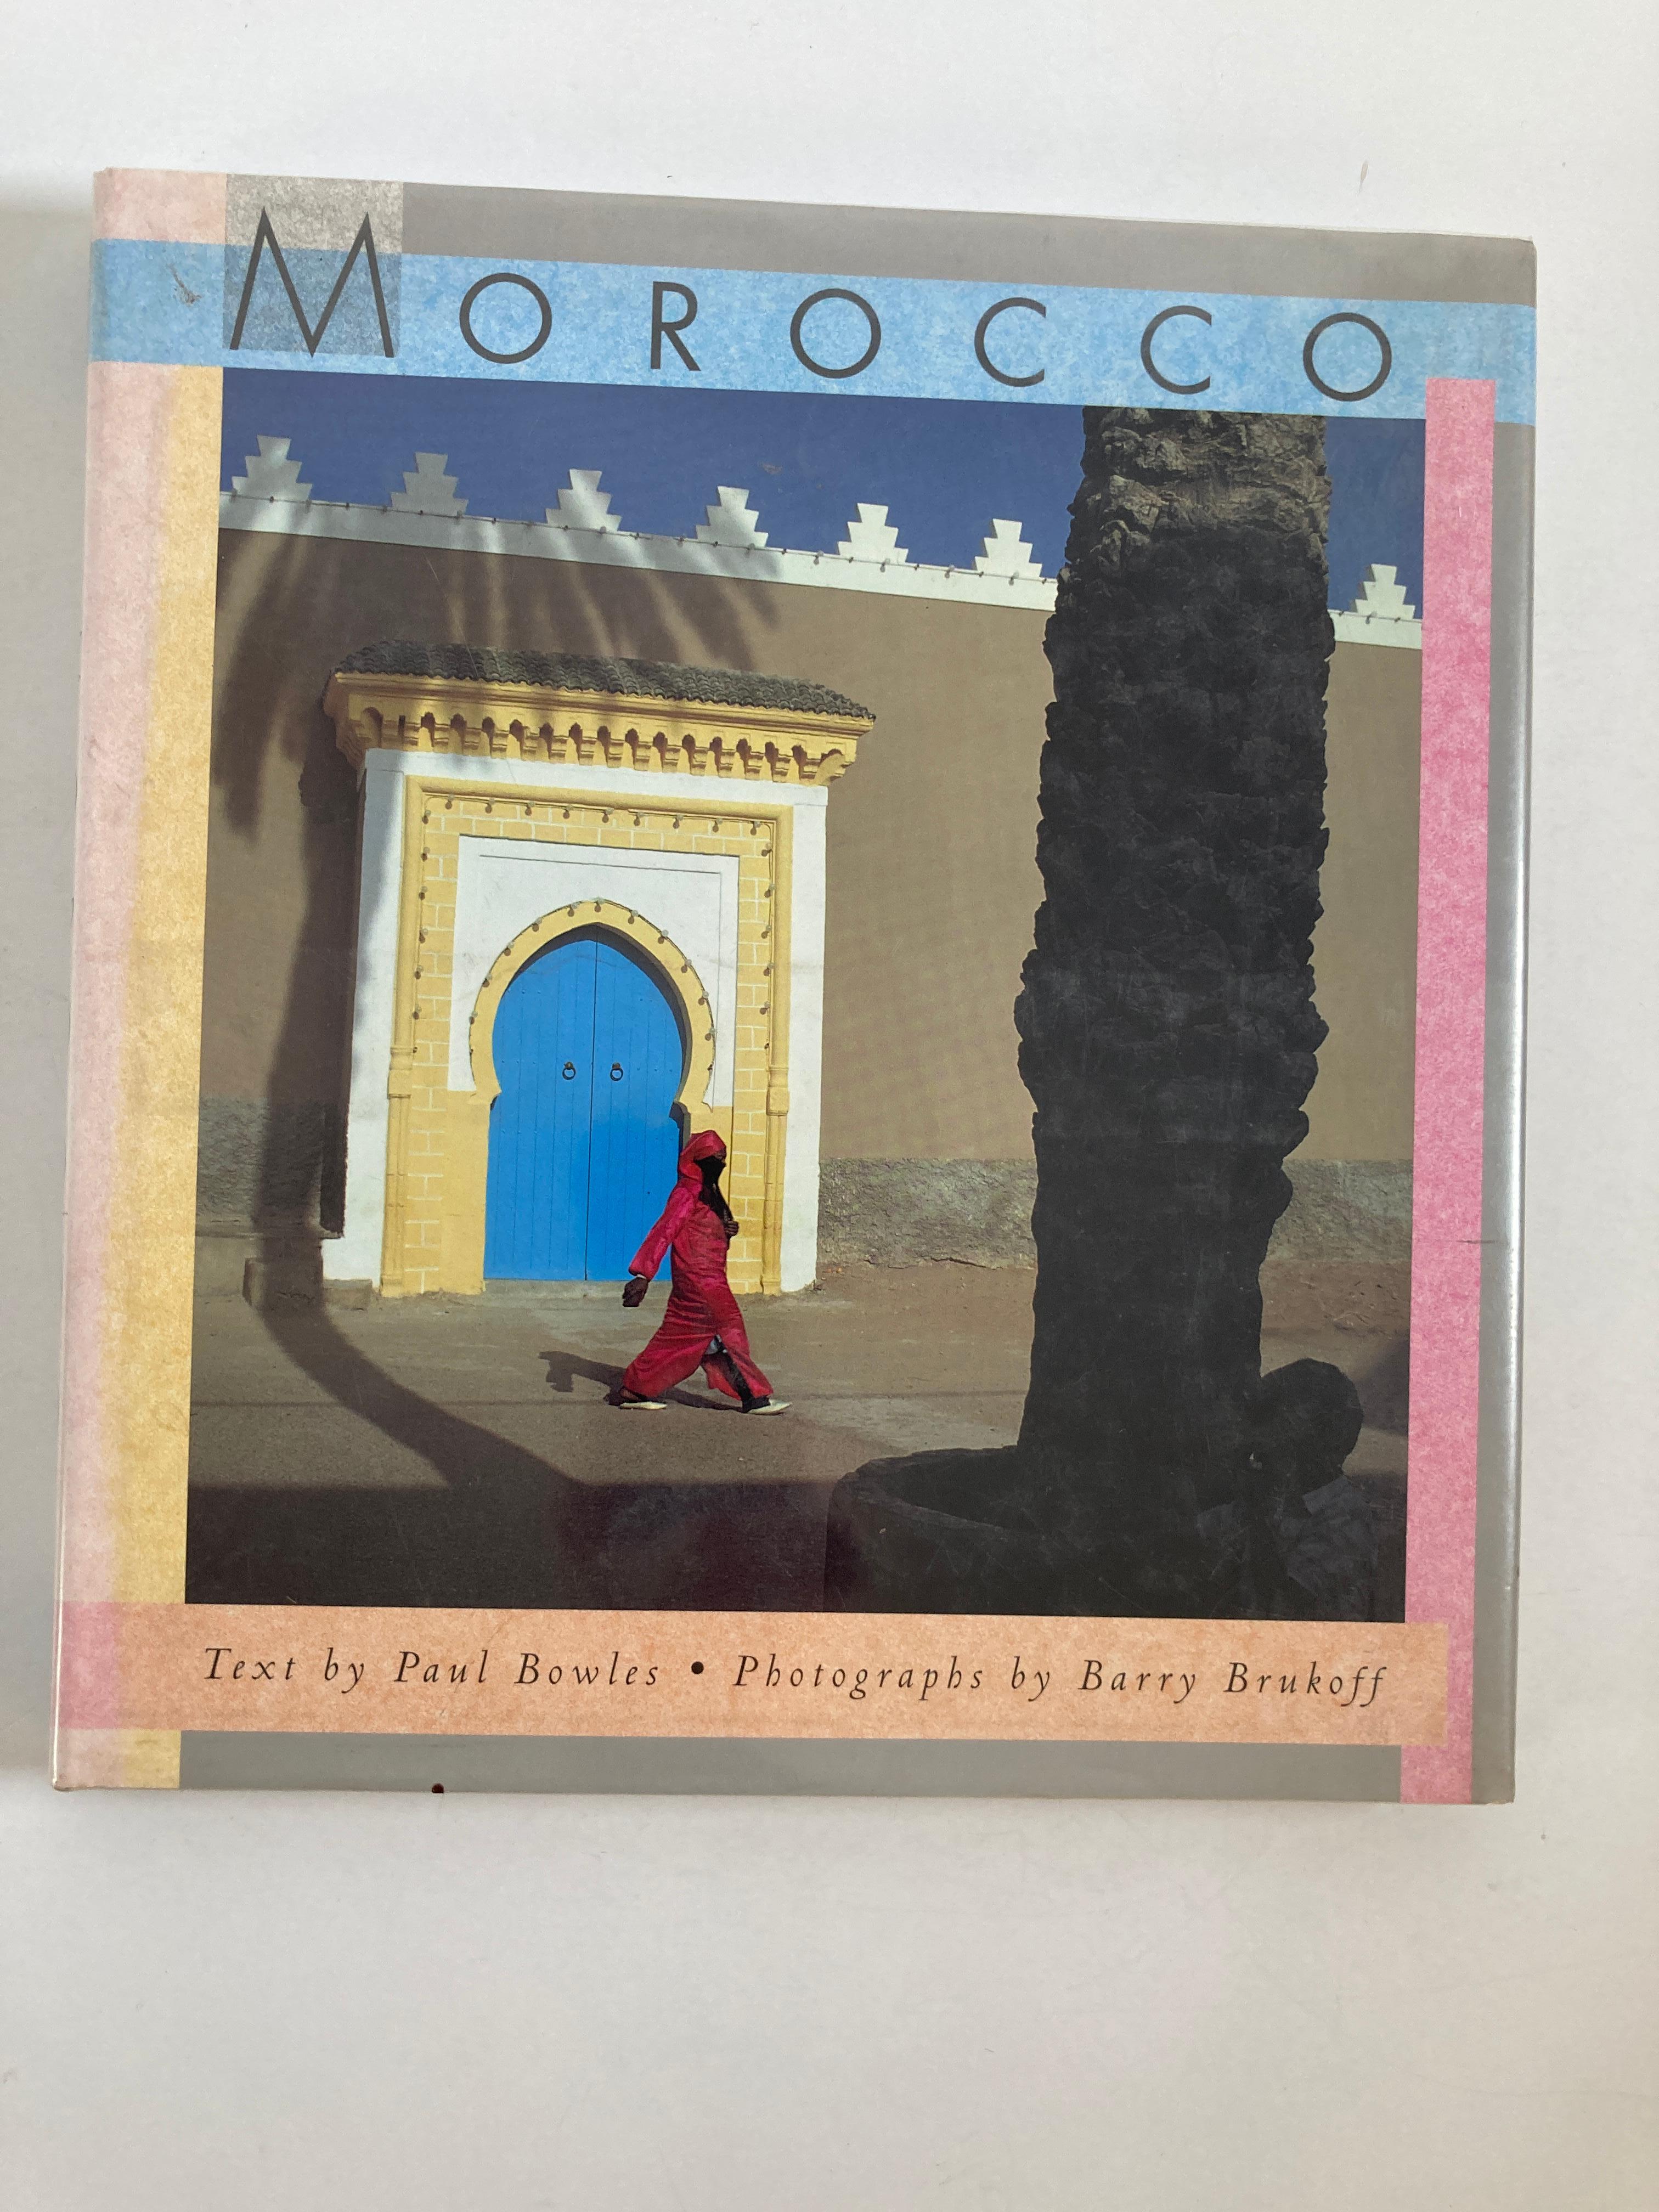 No American writer is more closely identified with Morocco than Paul Bowles, who traveled there with his wife, Jane, in the 1930s and remained as a famous expatriate for many years. In 1991, San Francisco-based photographer Barry Brukoff traveled to